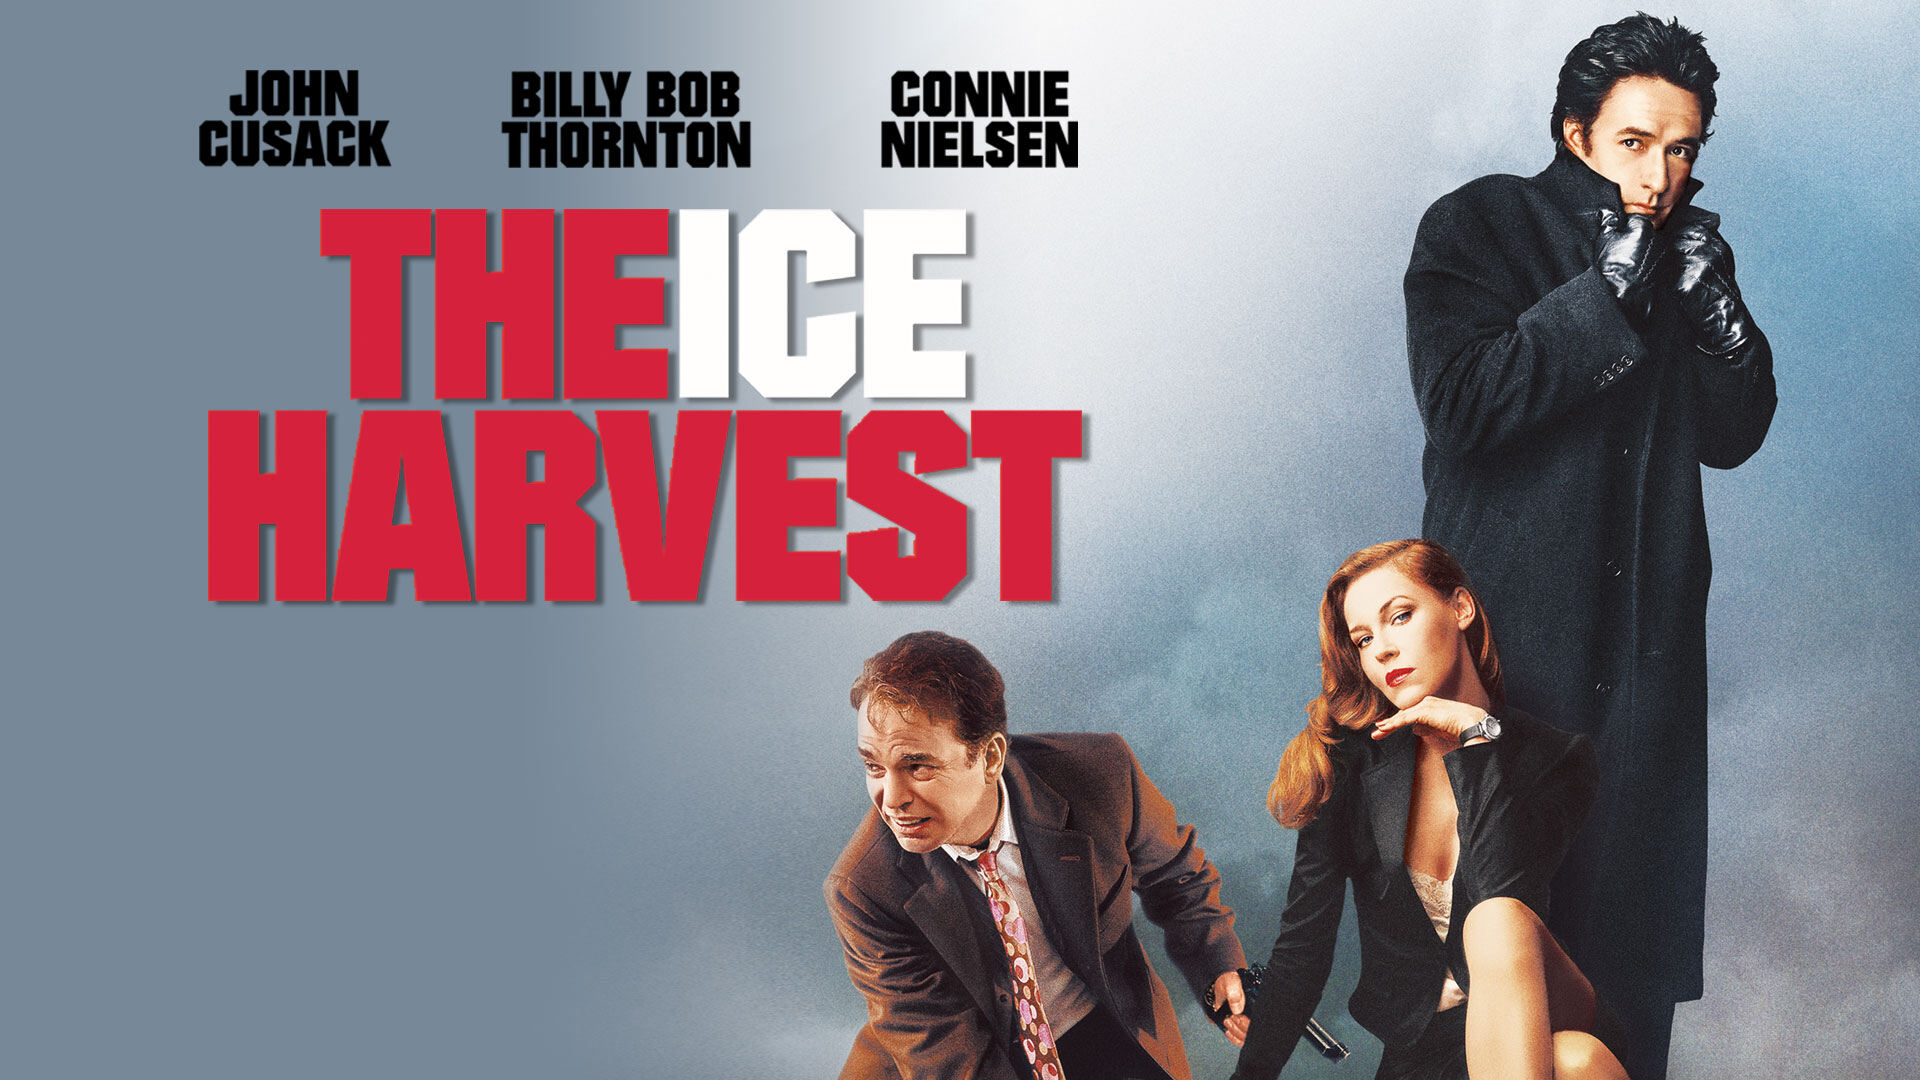 44-facts-about-the-movie-the-ice-harvest